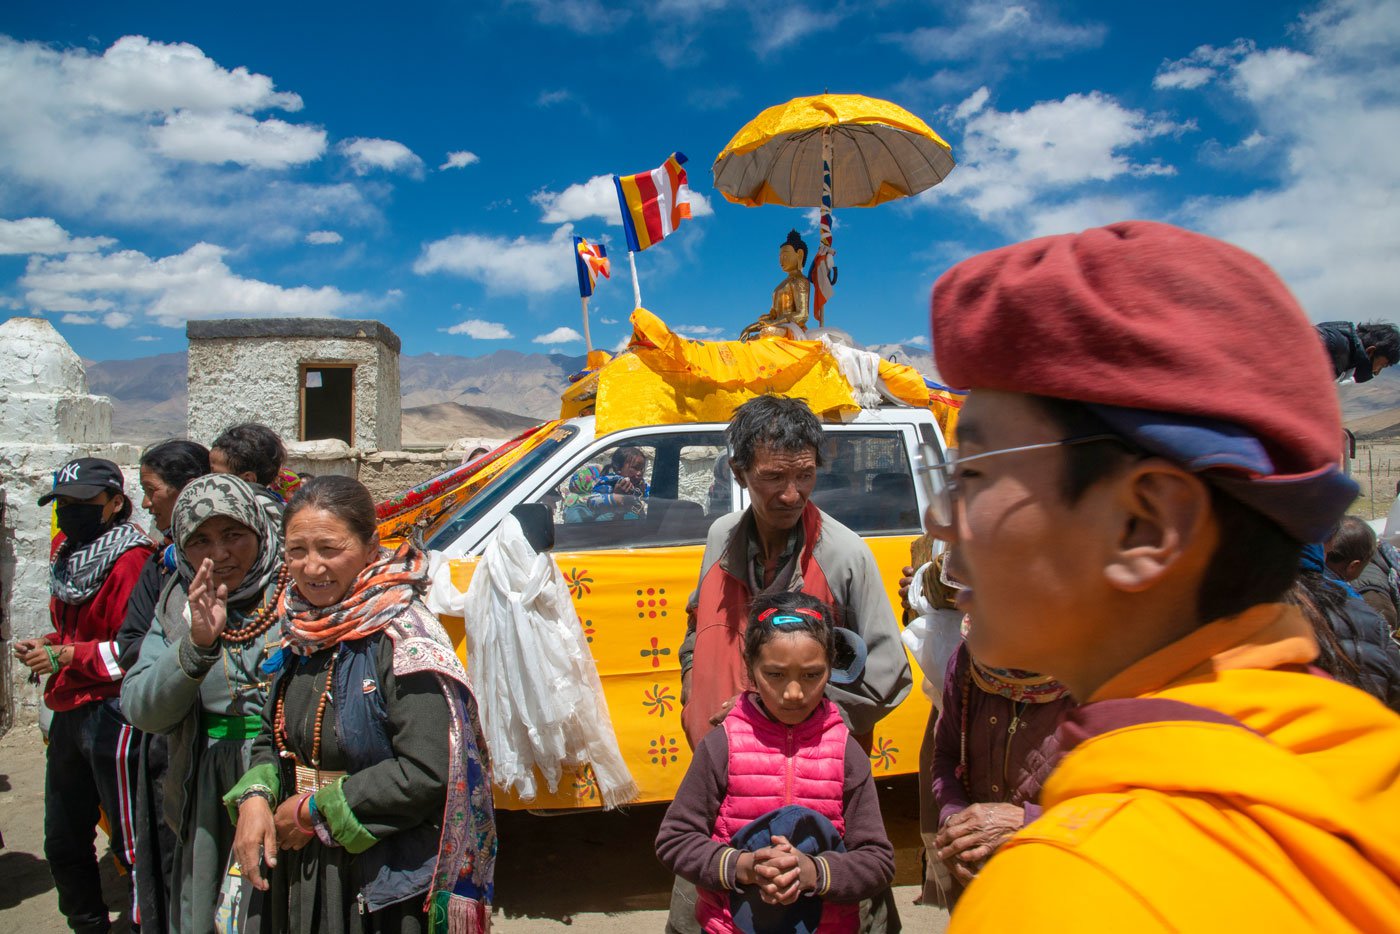 The residents of Shado village gather in Gompa to greet and meet the lamas who have brought holy scriptures